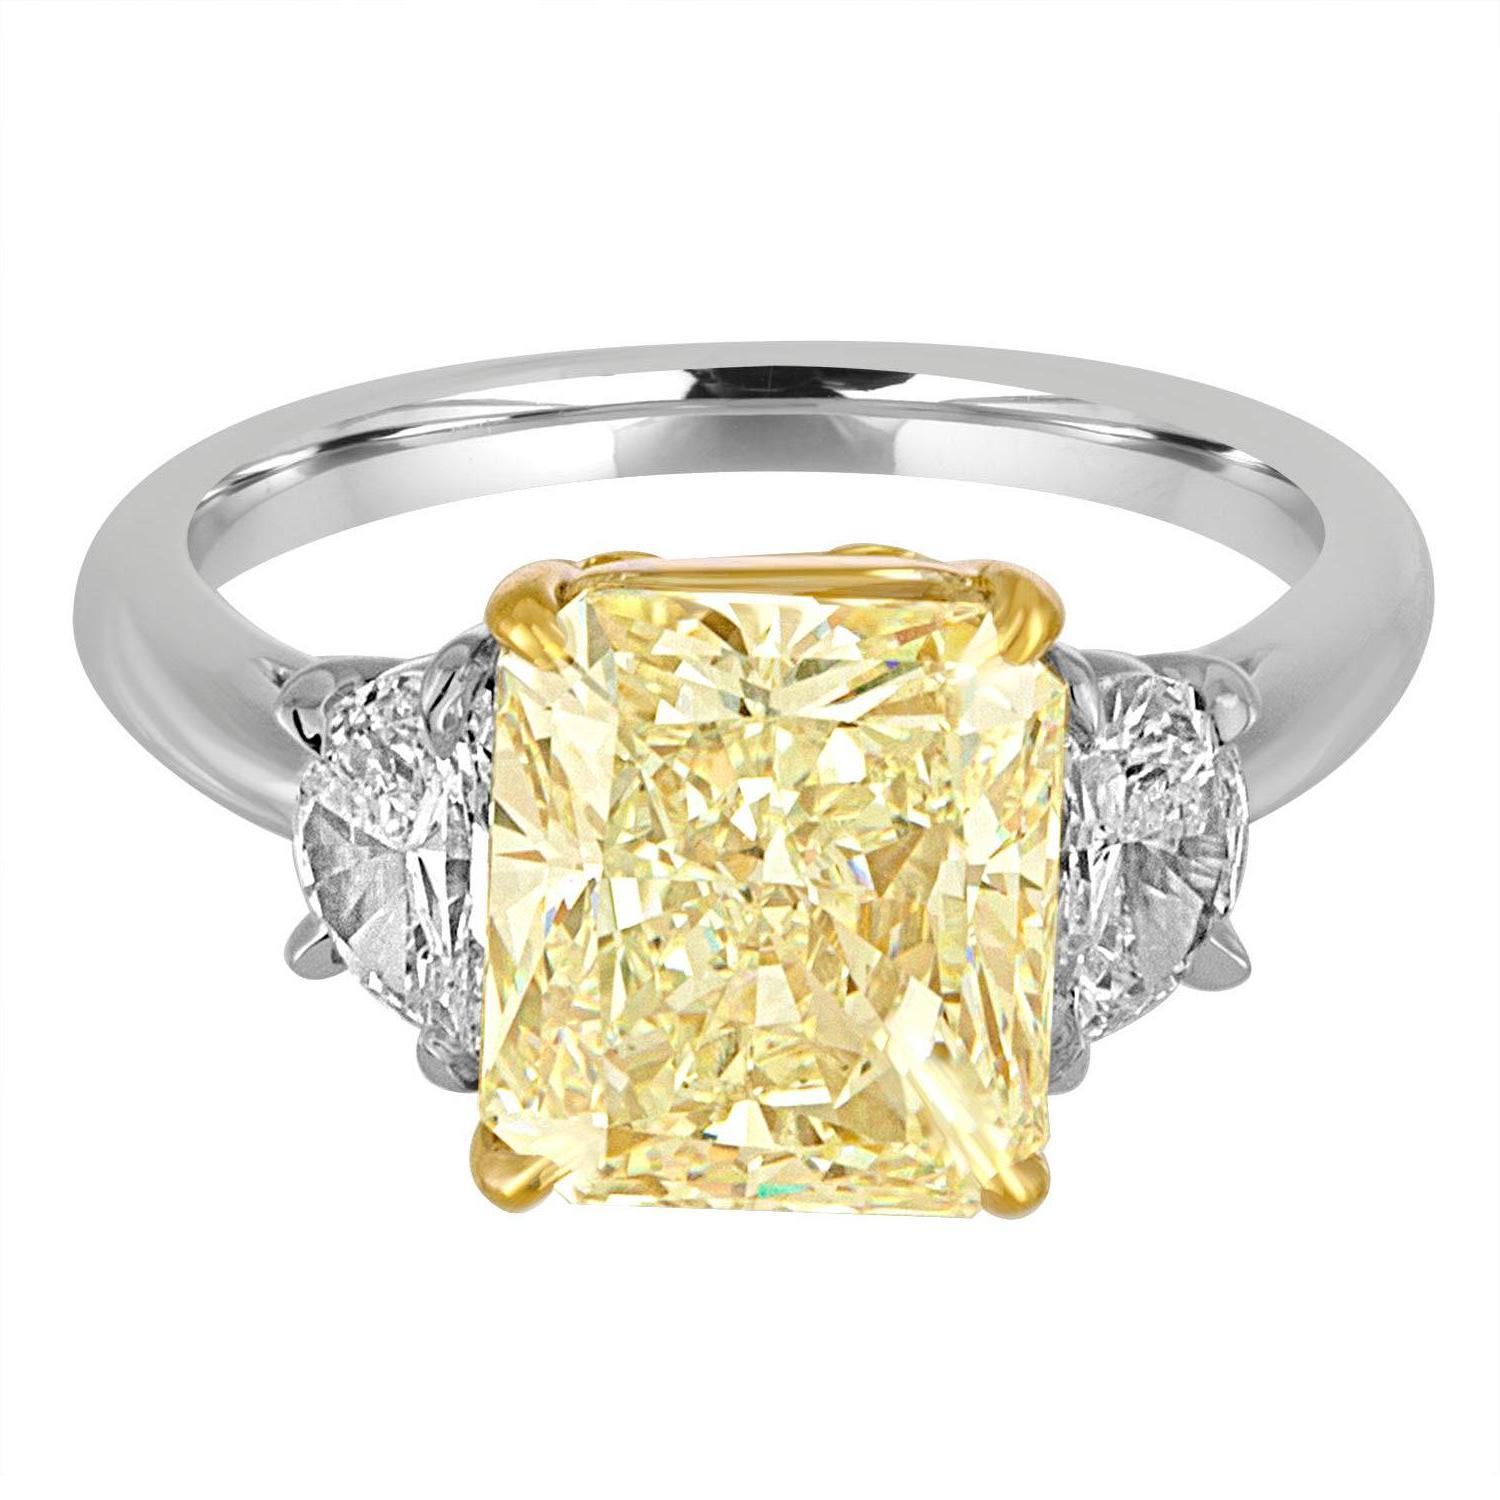 Contemporary 4.01 Carat Radiant Diamond Set with Half Moons in Gold and Platinum Mounting